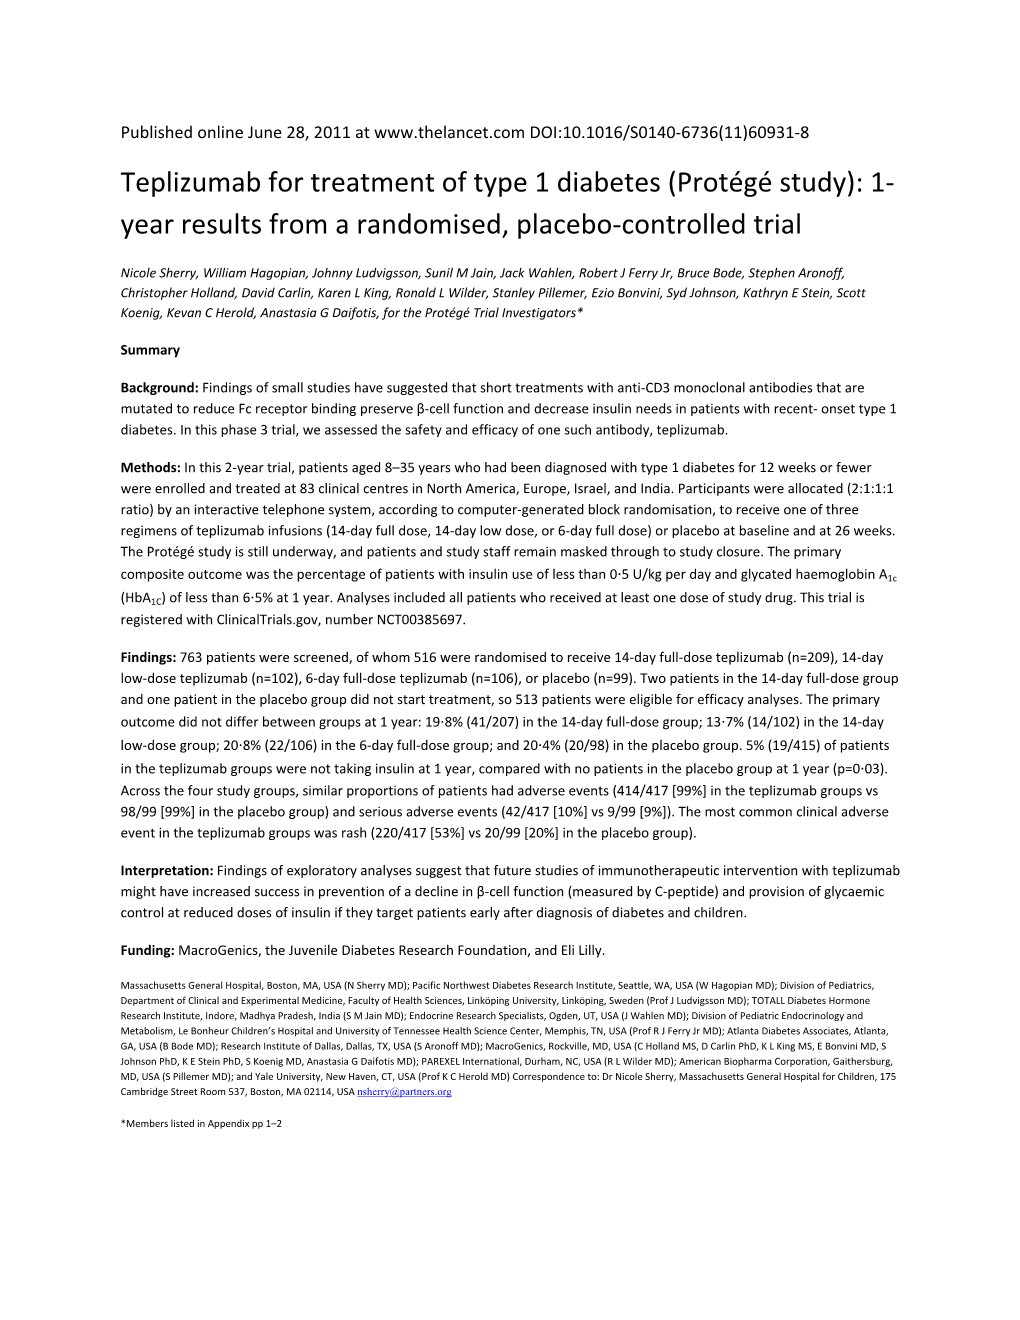 Teplizumab for Treatment of Type 1 Diabetes (Protégé Study): 1‐ Year Results from a Randomised, Placebo‐Controlled Trial